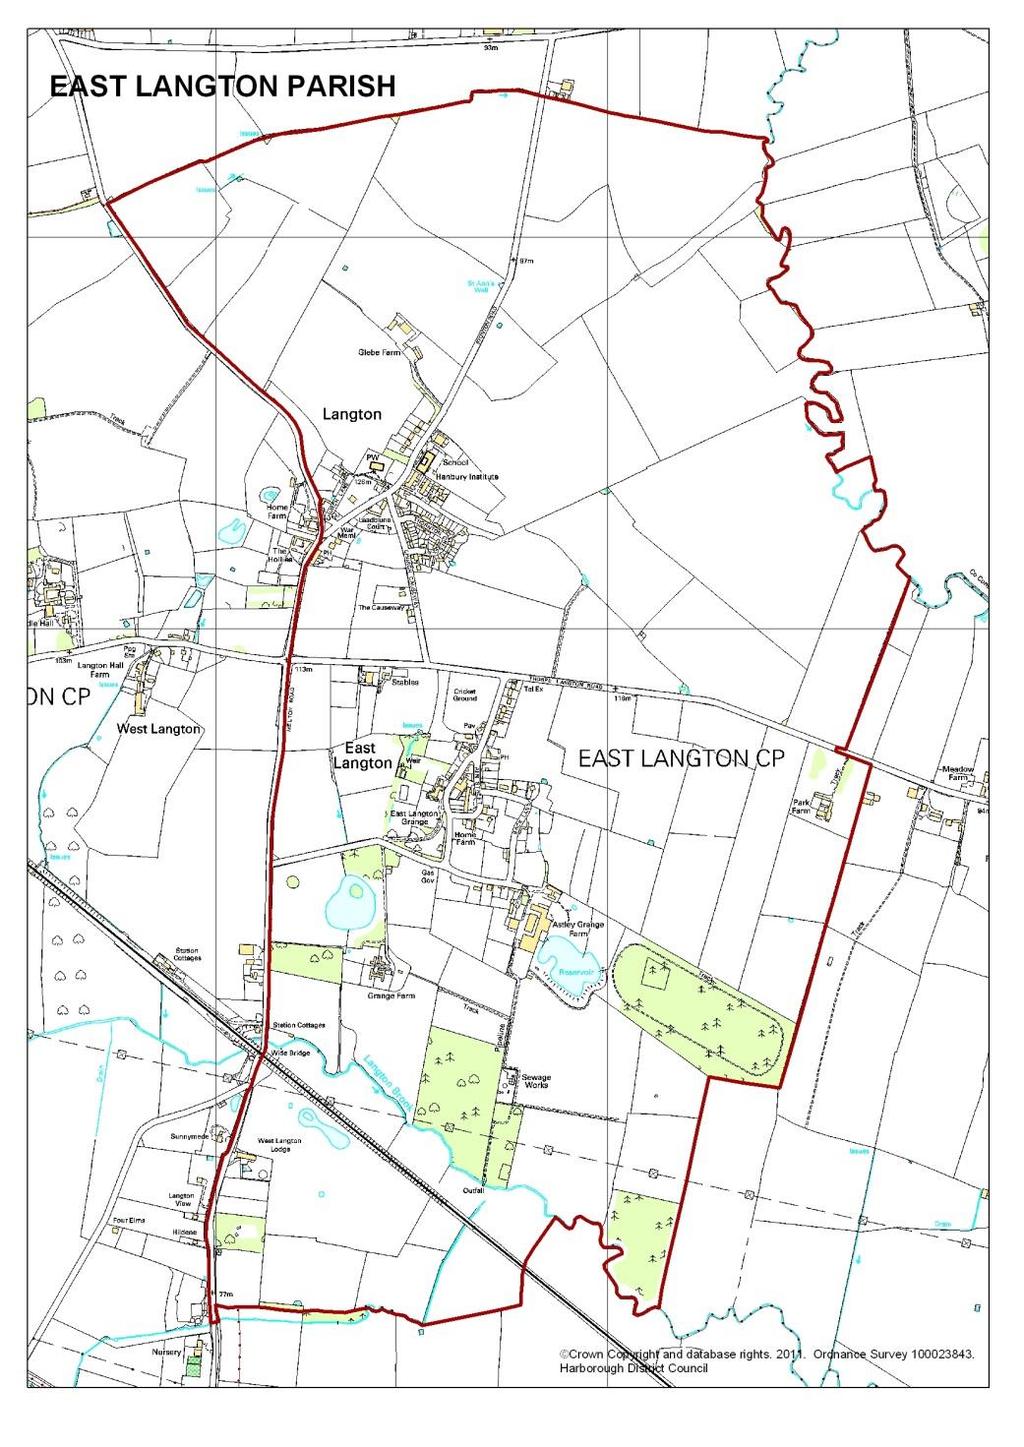 4. Our Neighbourhood The Plan area comprises the whole of the Parish of East Langton in the Harborough District within the south of Leicestershire, as shown in